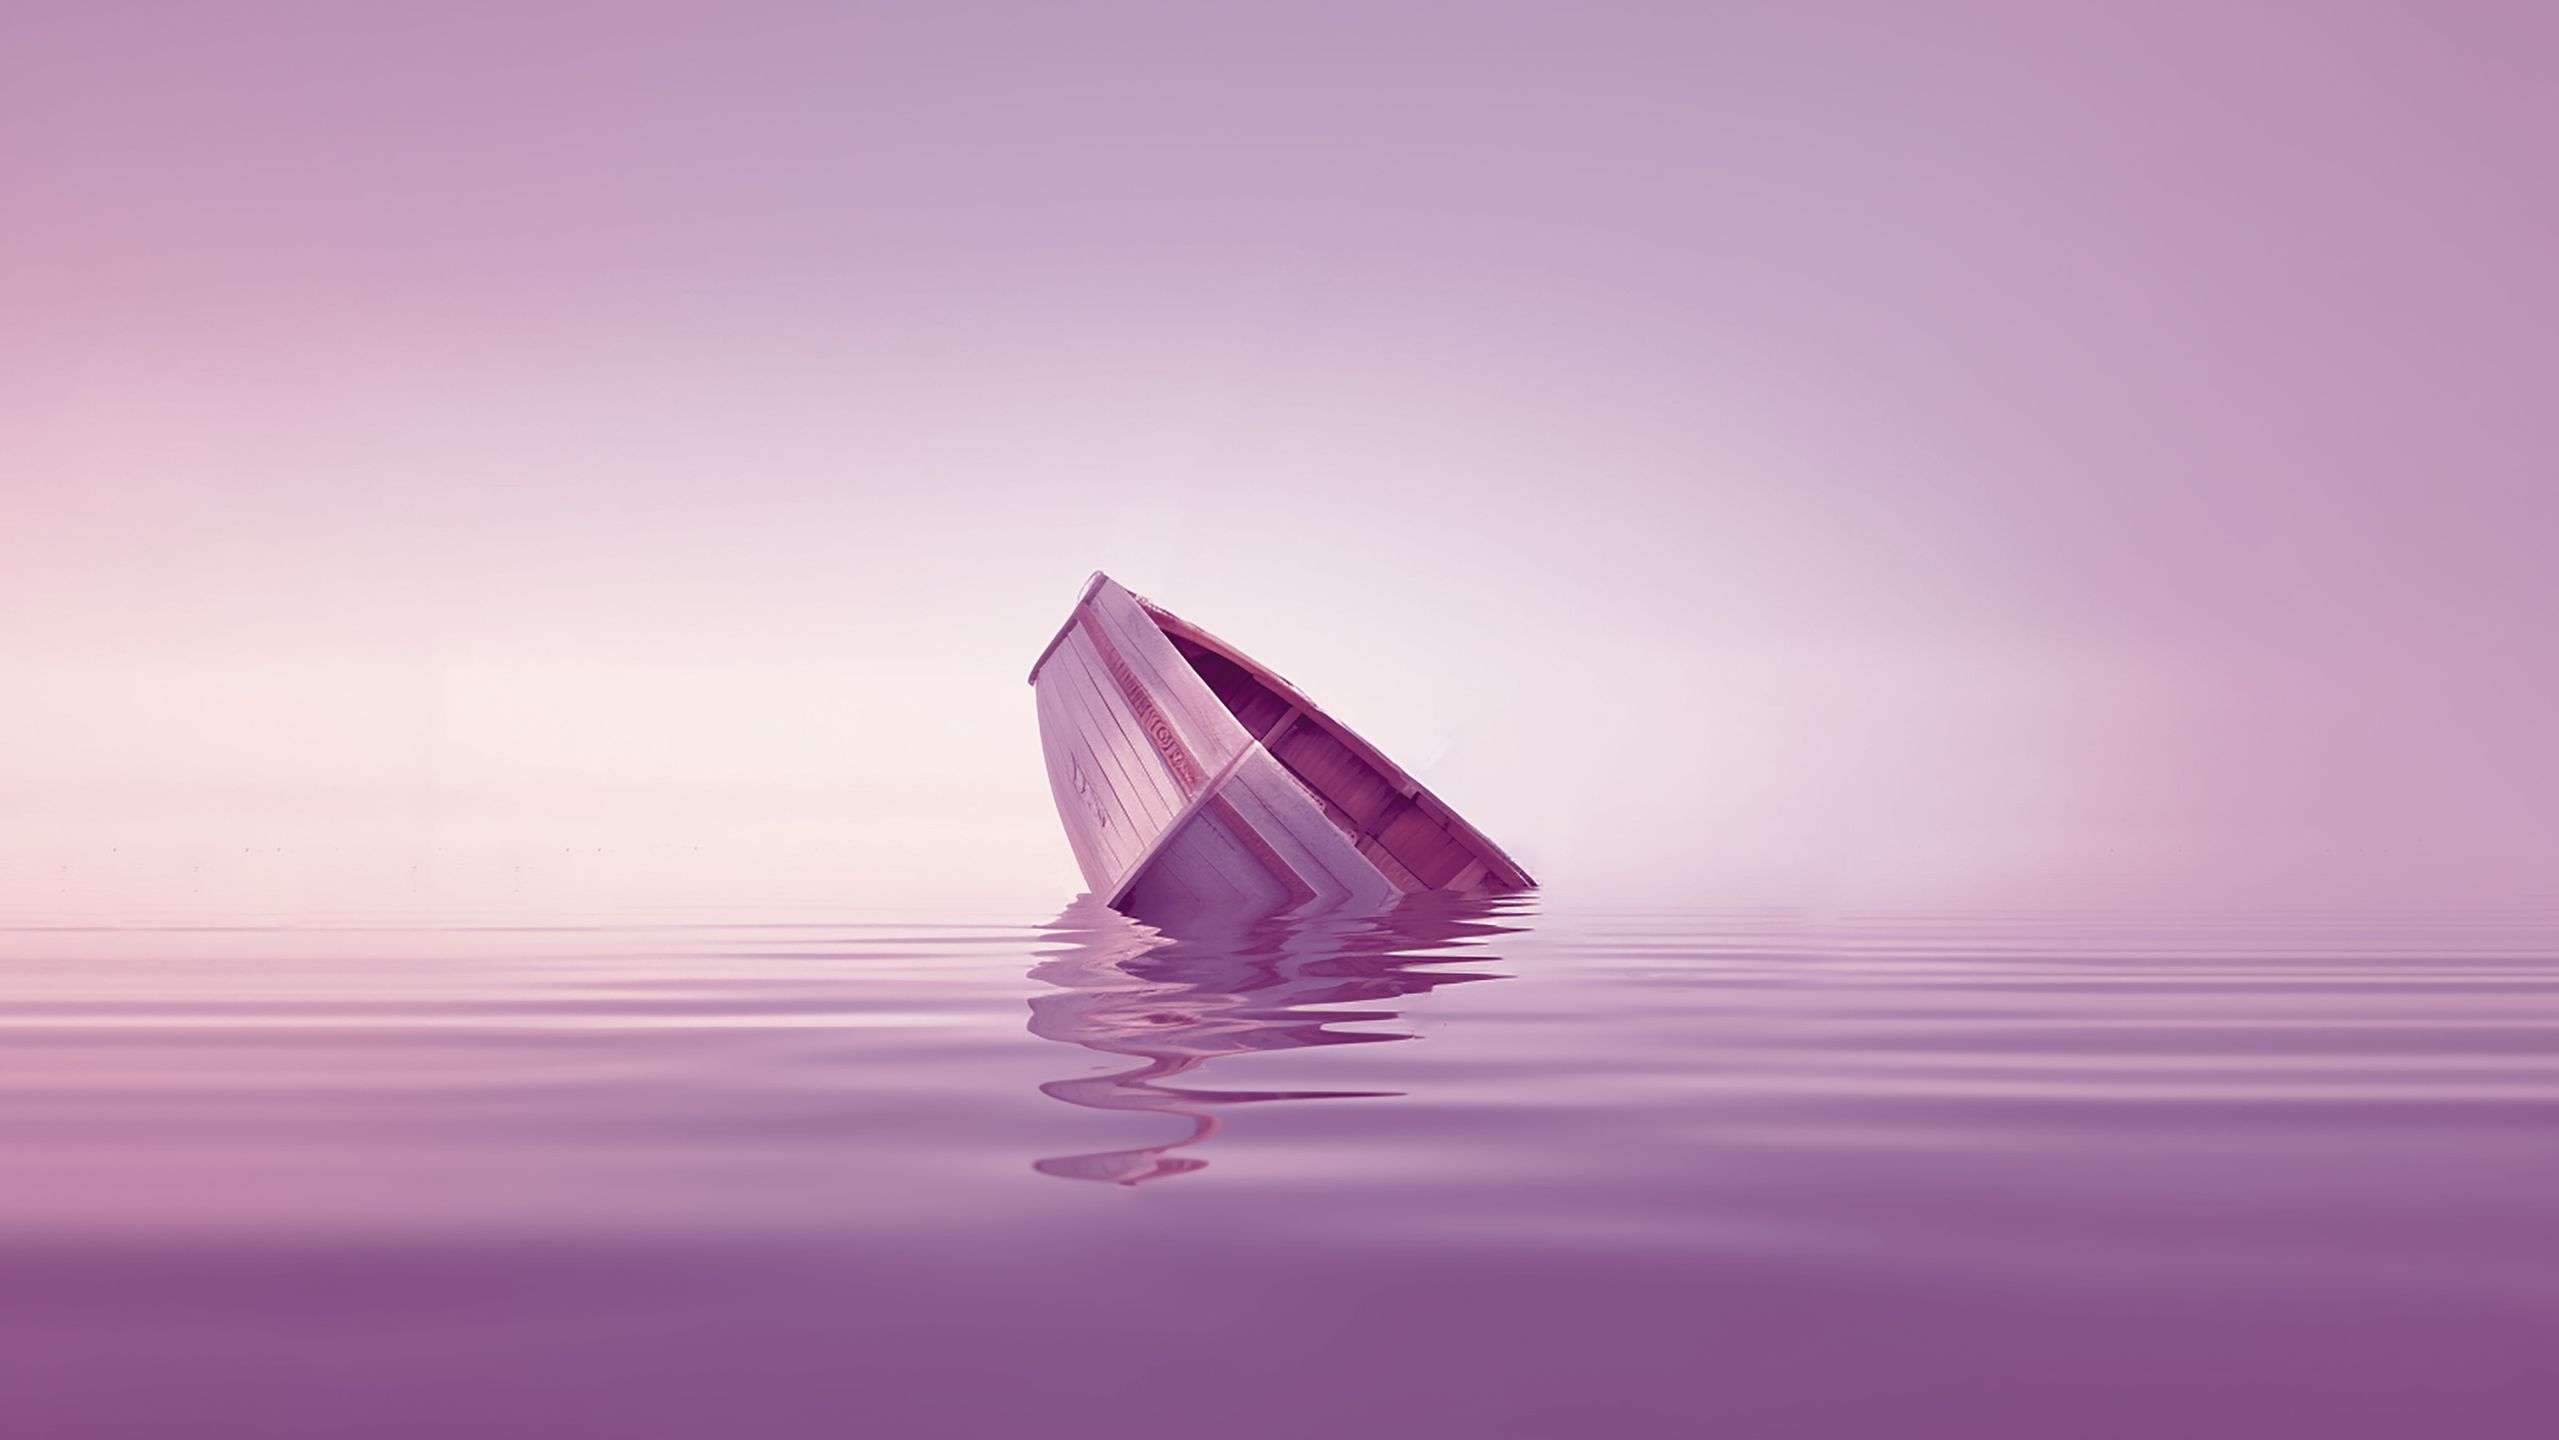 Pink hued image of a row boat sinking in the sea